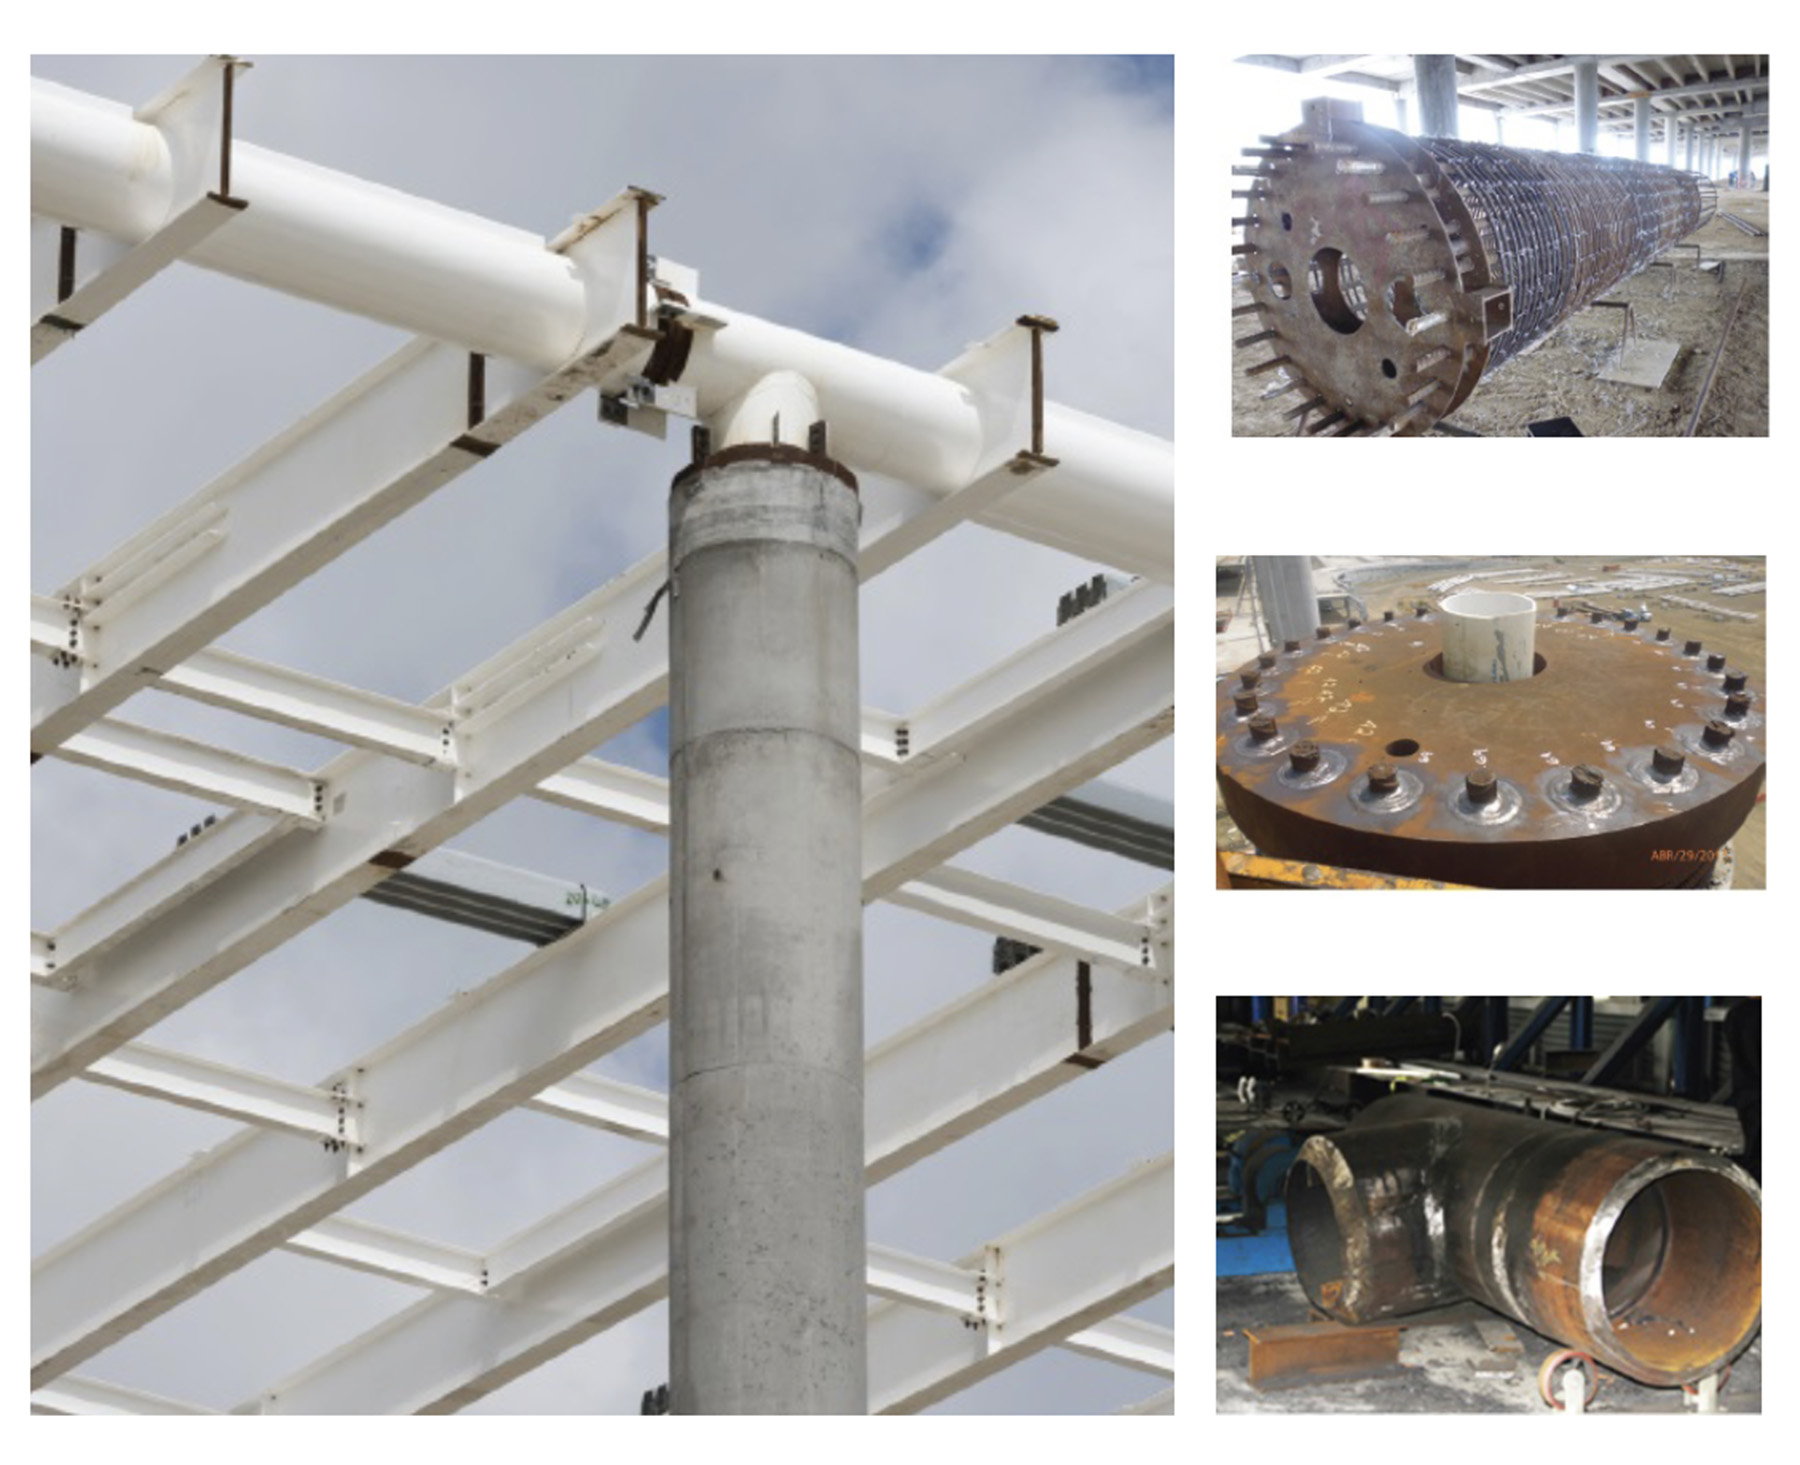 Image shows the transition between the concrete roof column and tubular primary girders on the left. On the right are three smaller pictures showing how column-reinforcing bars are connected to the base plates via welds.